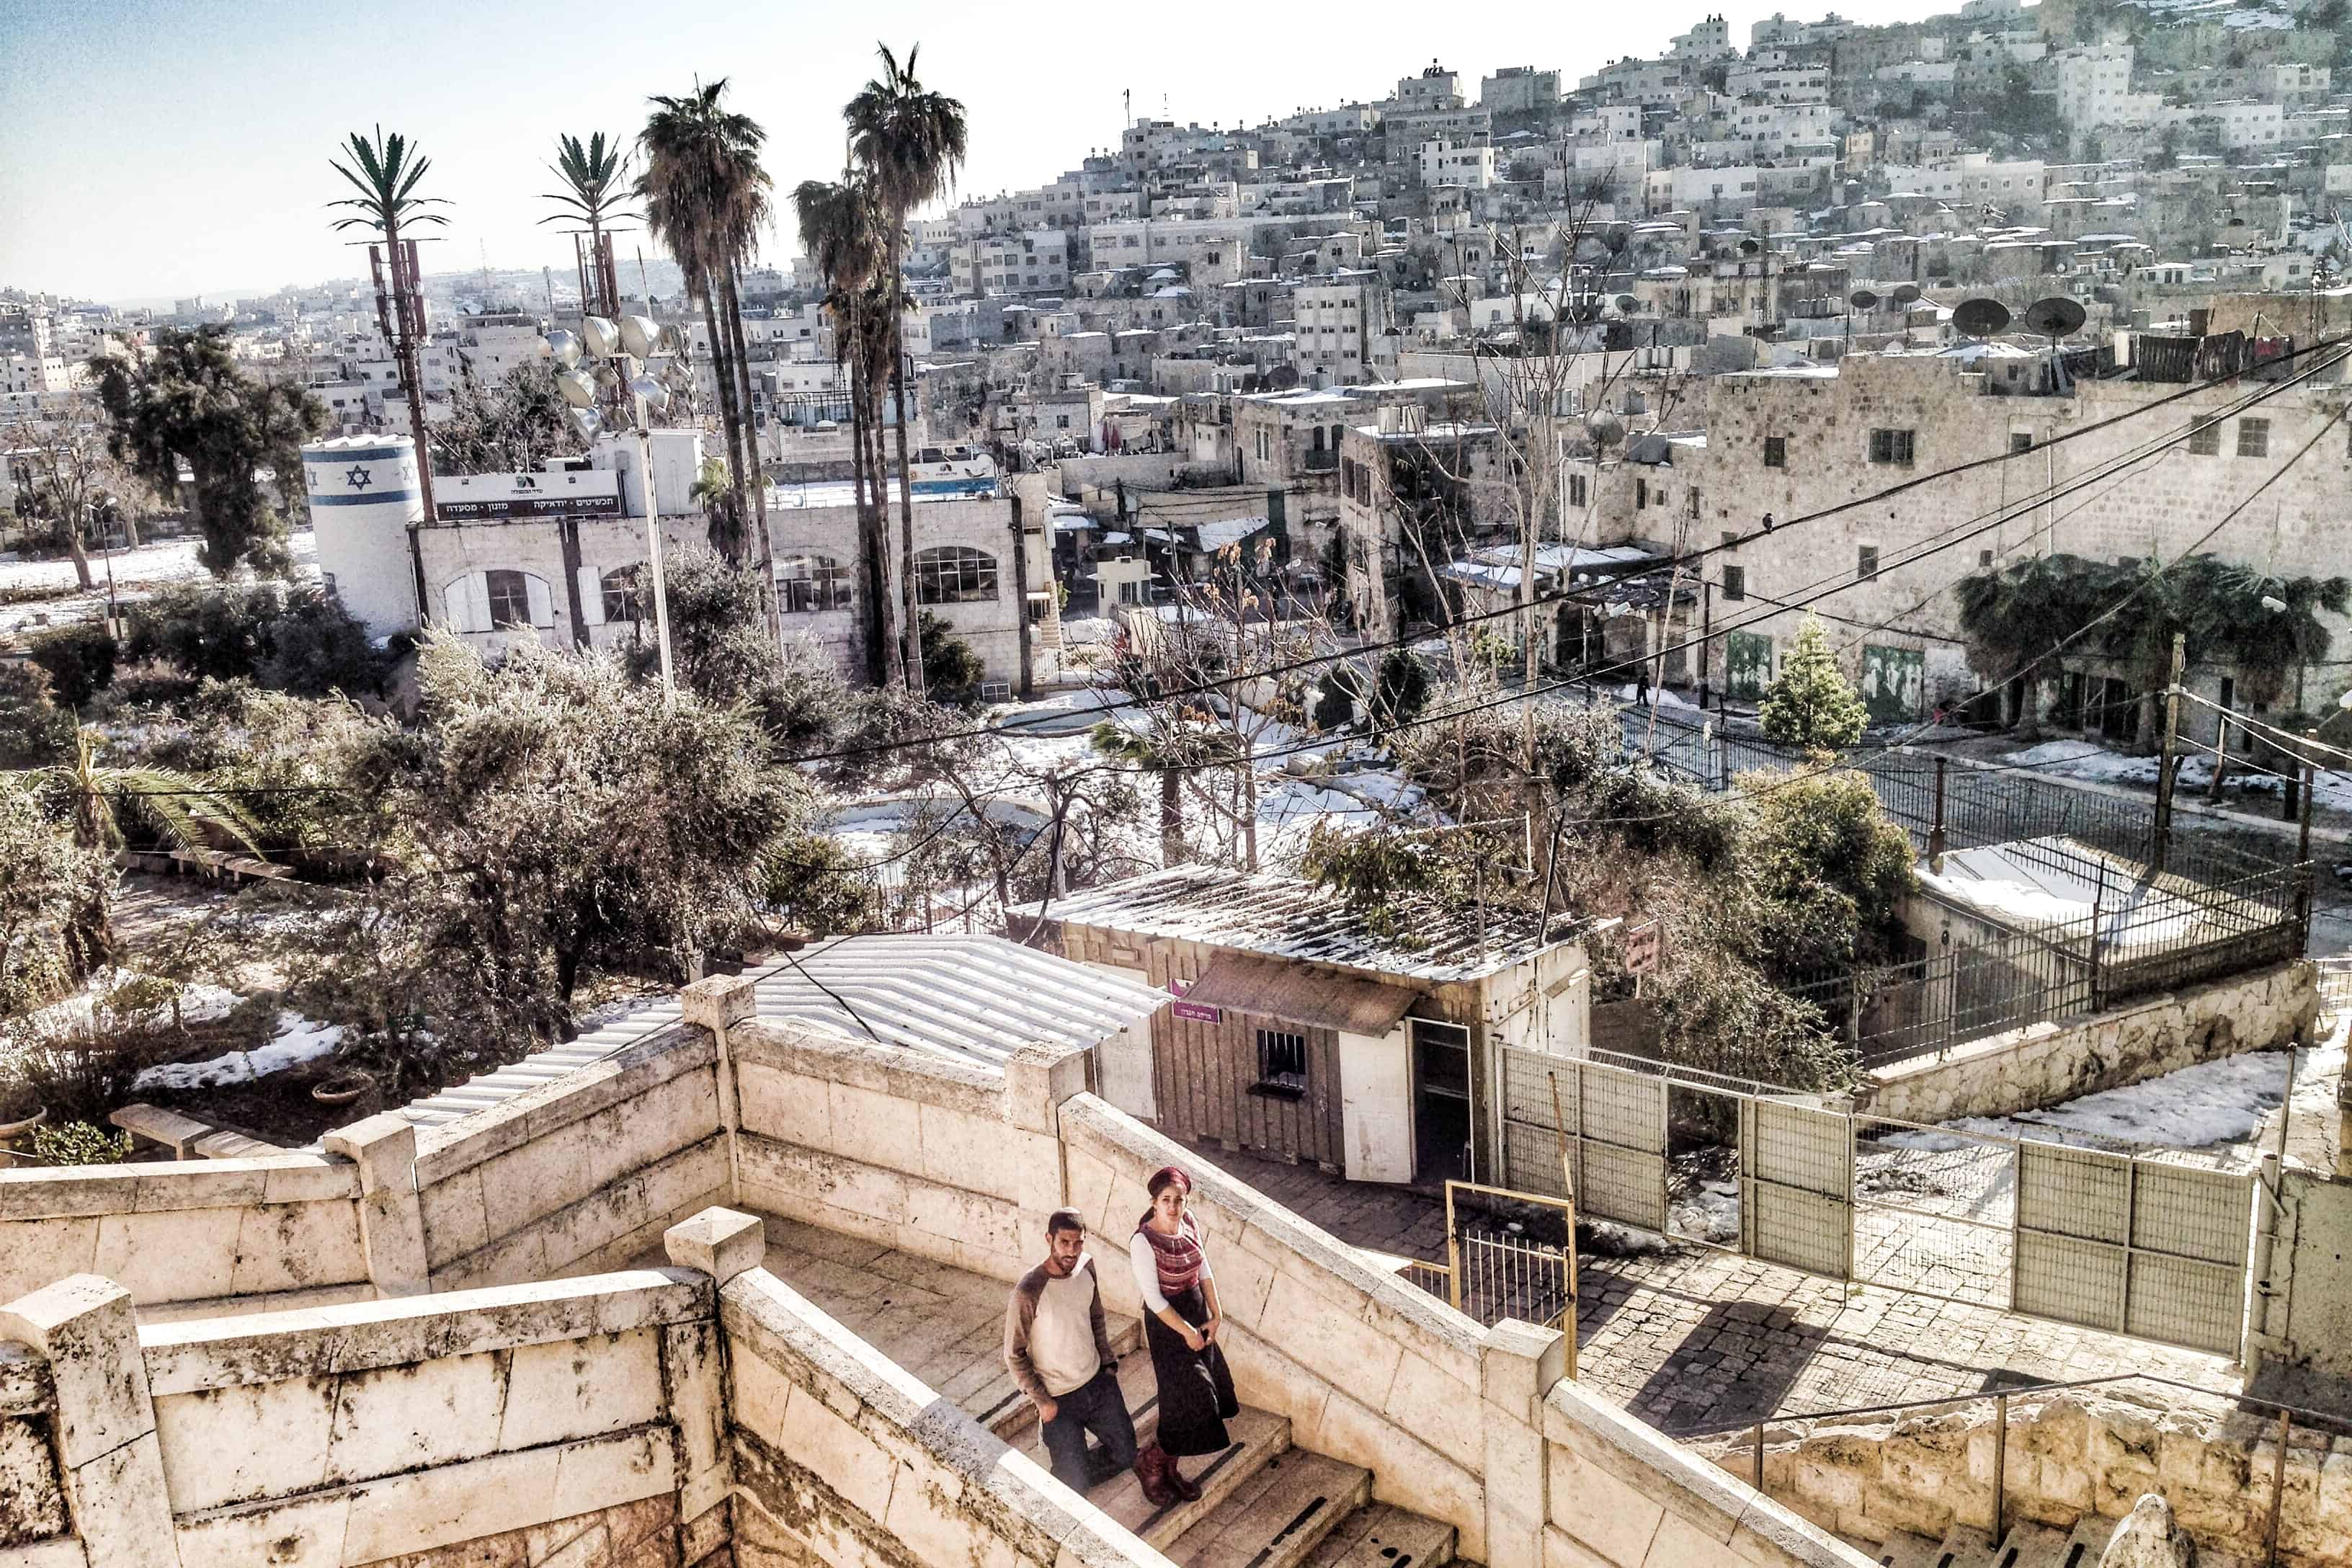 A man and woman walking down white stone steps in a built-up residential area of the city of Hebron in the West Bank, Palestine